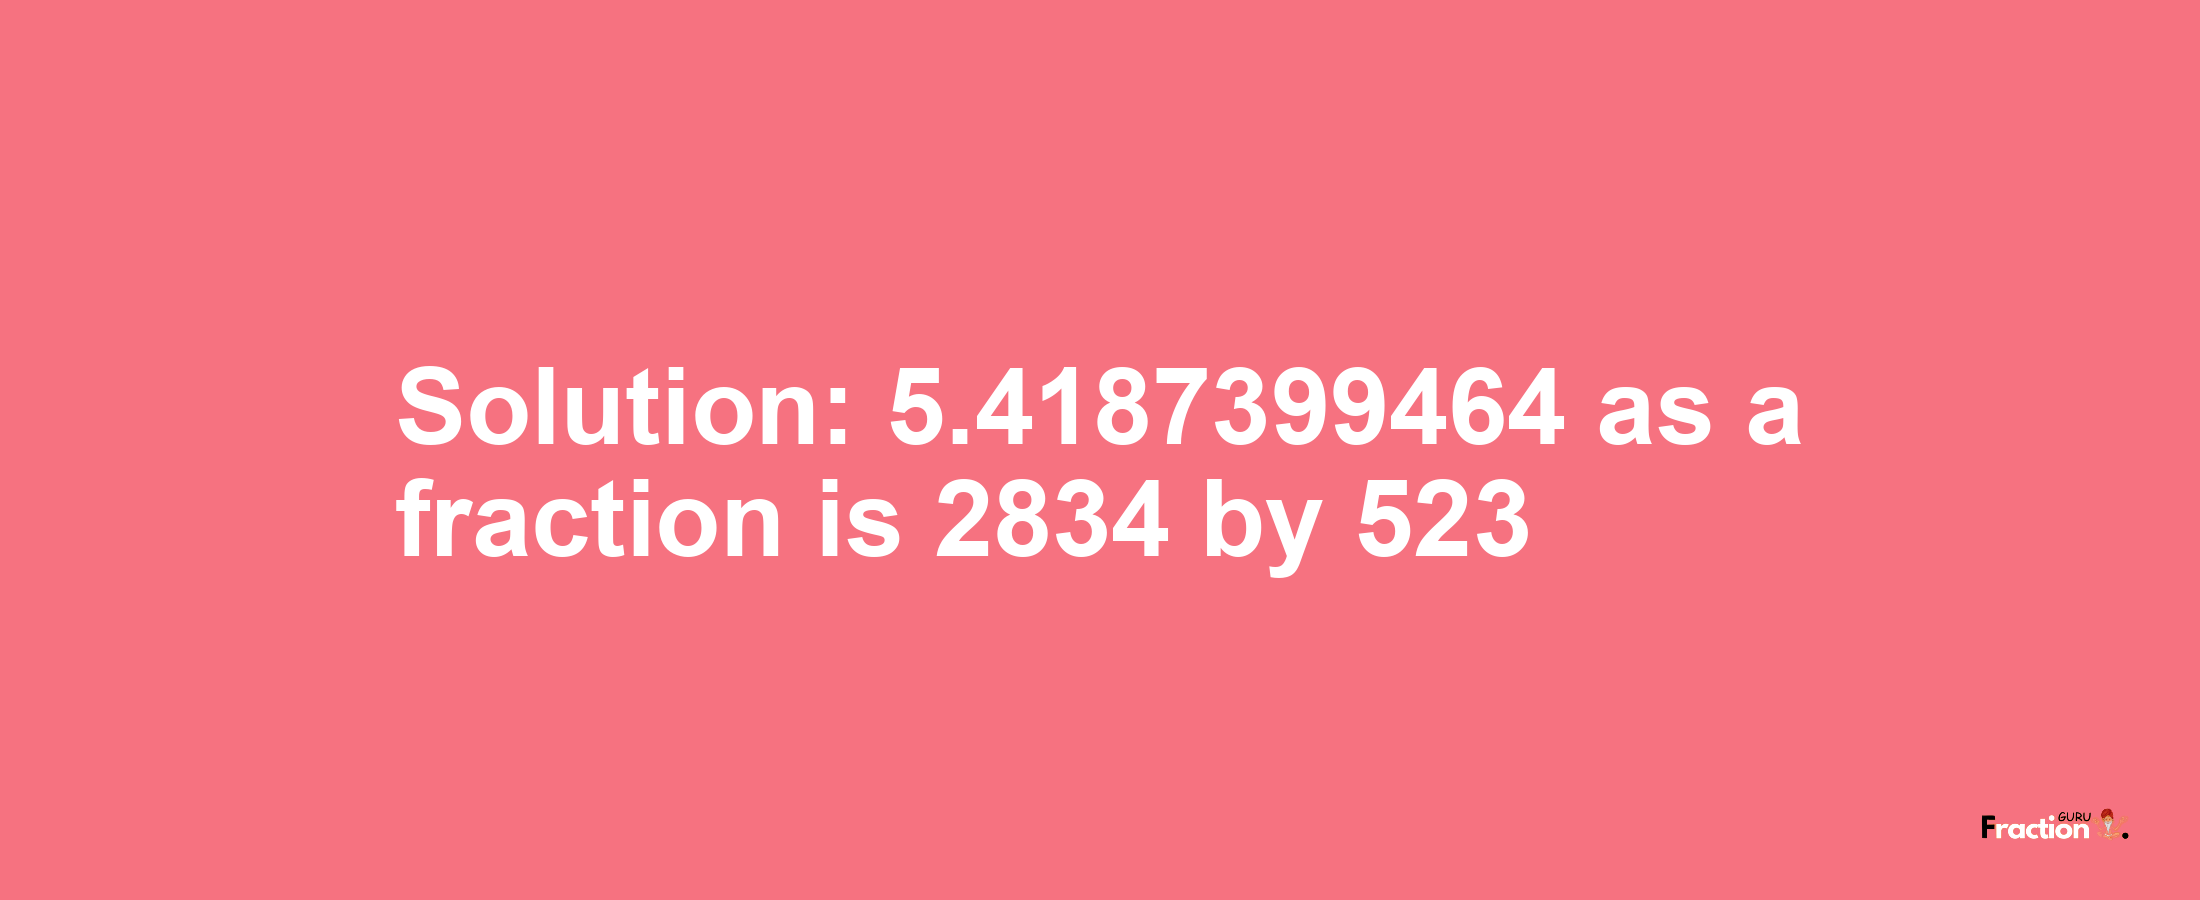 Solution:5.4187399464 as a fraction is 2834/523